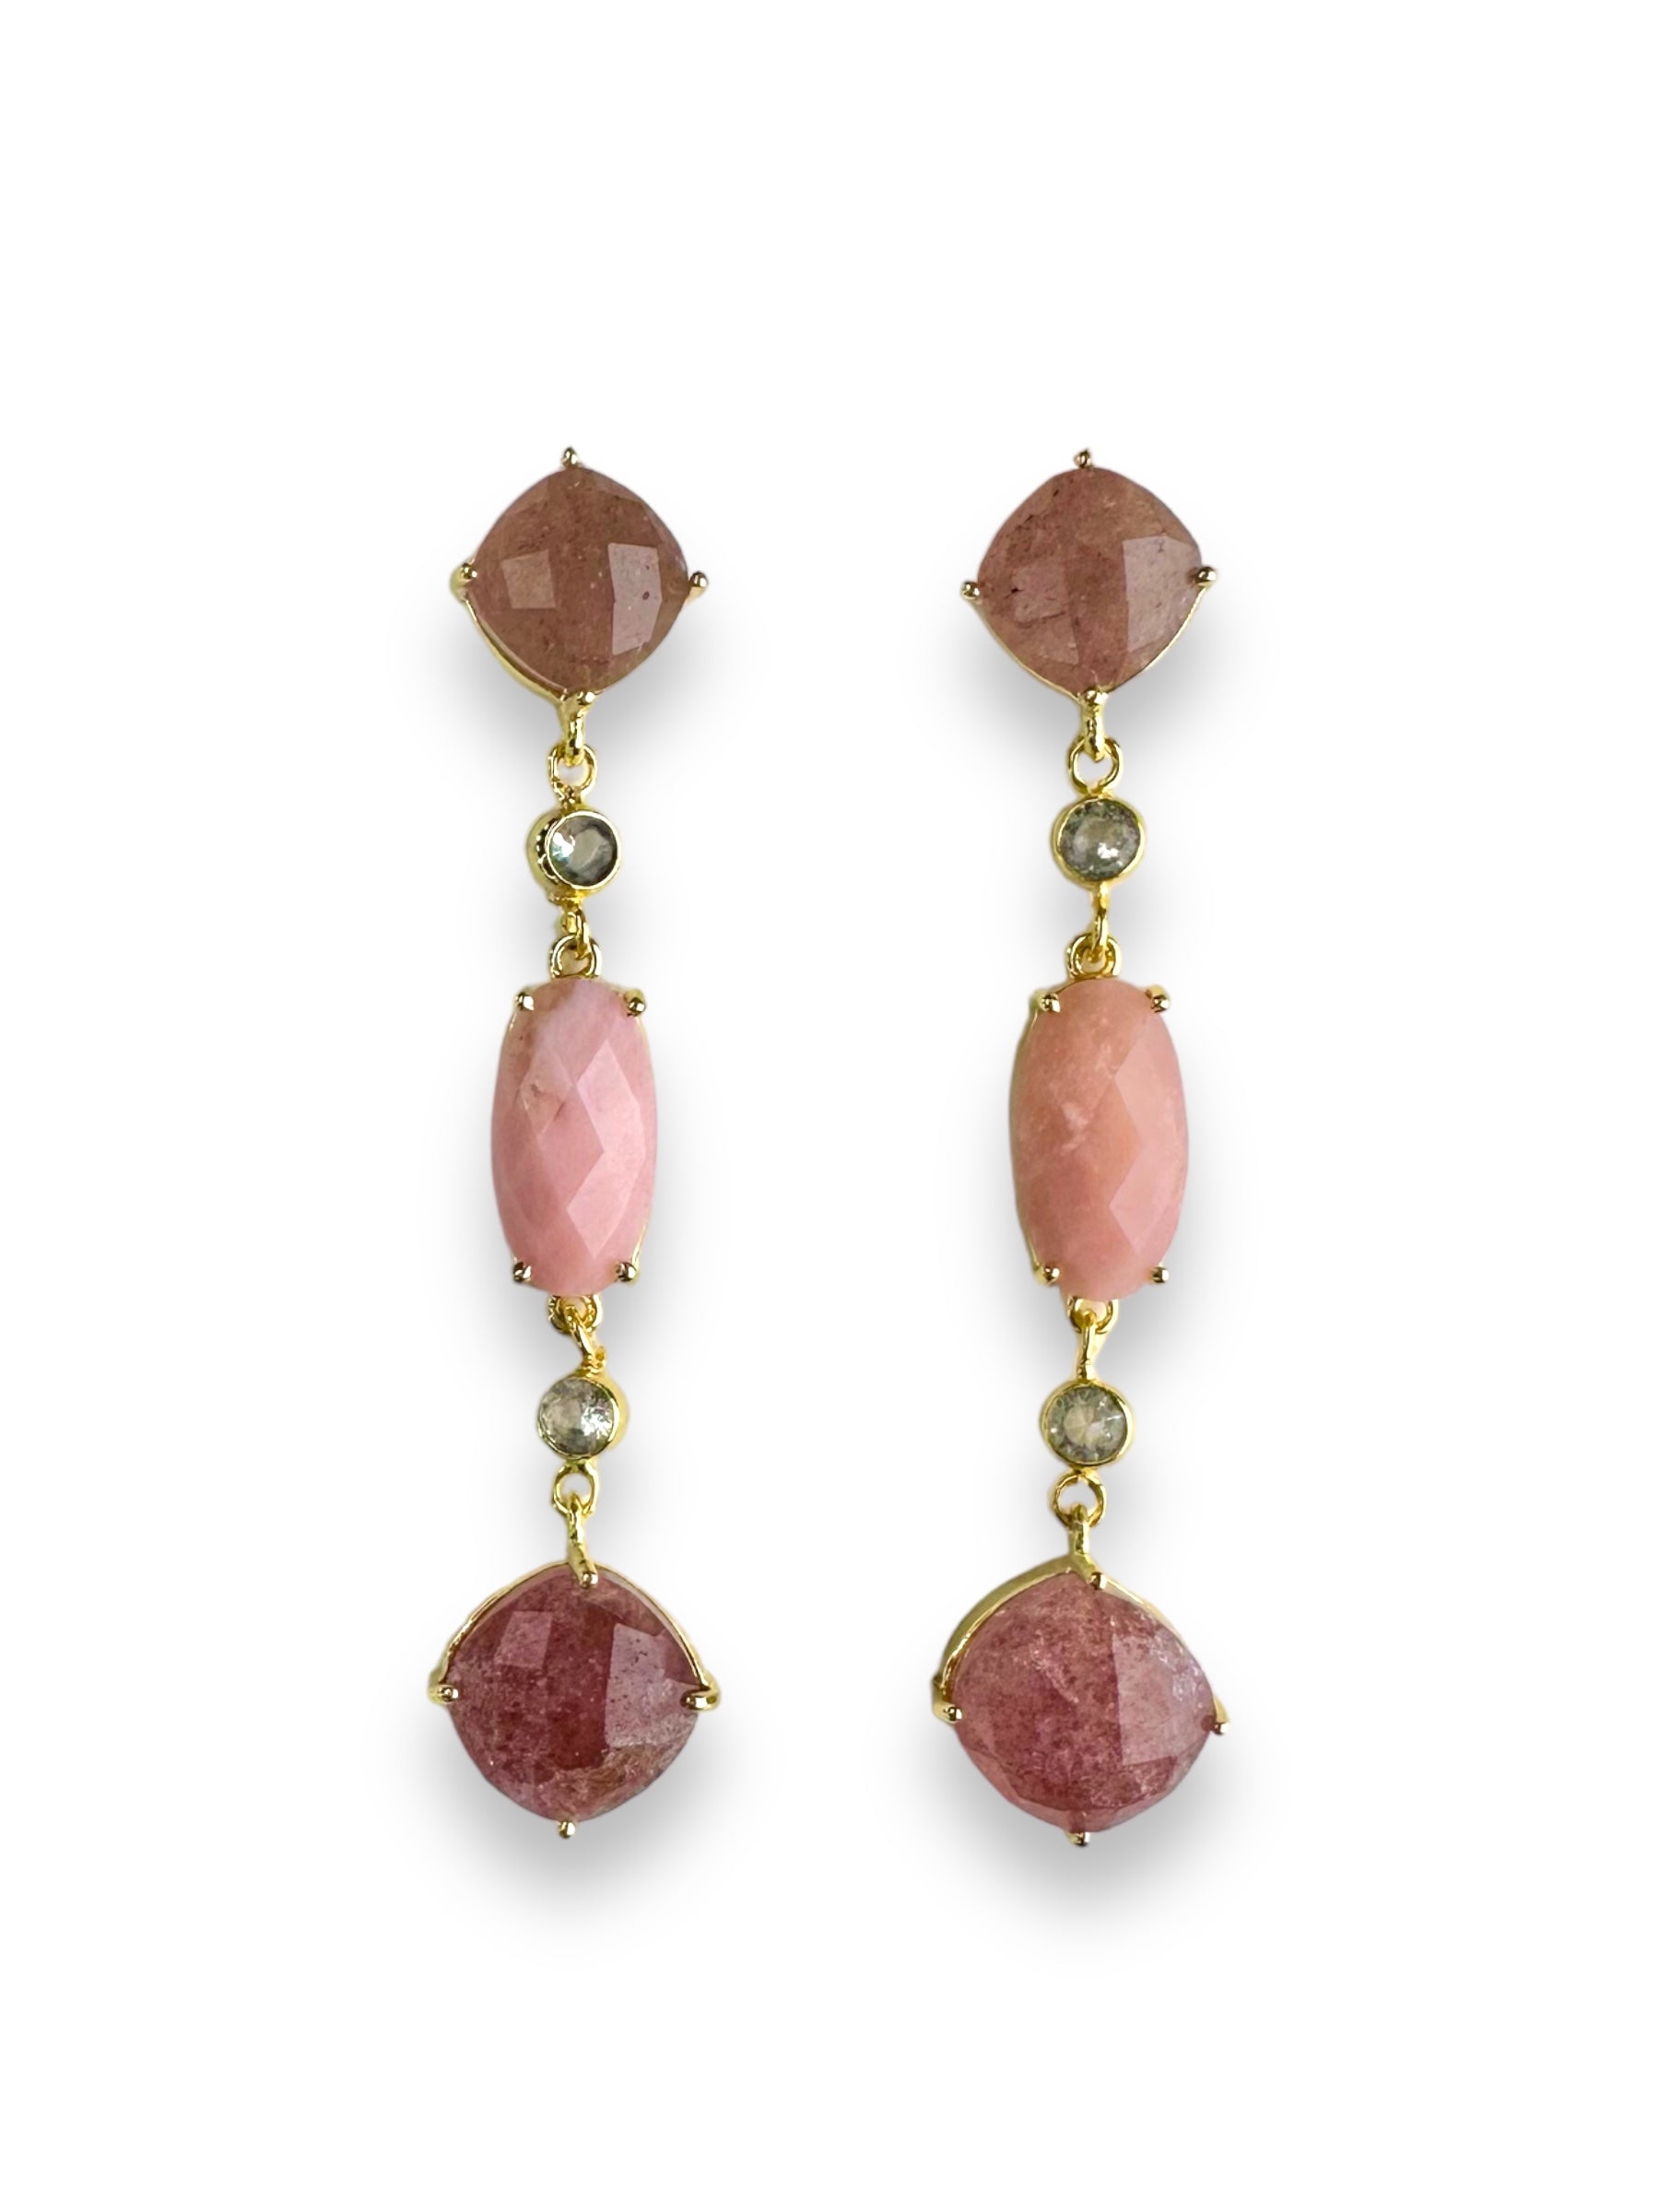 Camelia Gemstone Statement Earrings in Cherry Quartz and Pink Opal ...